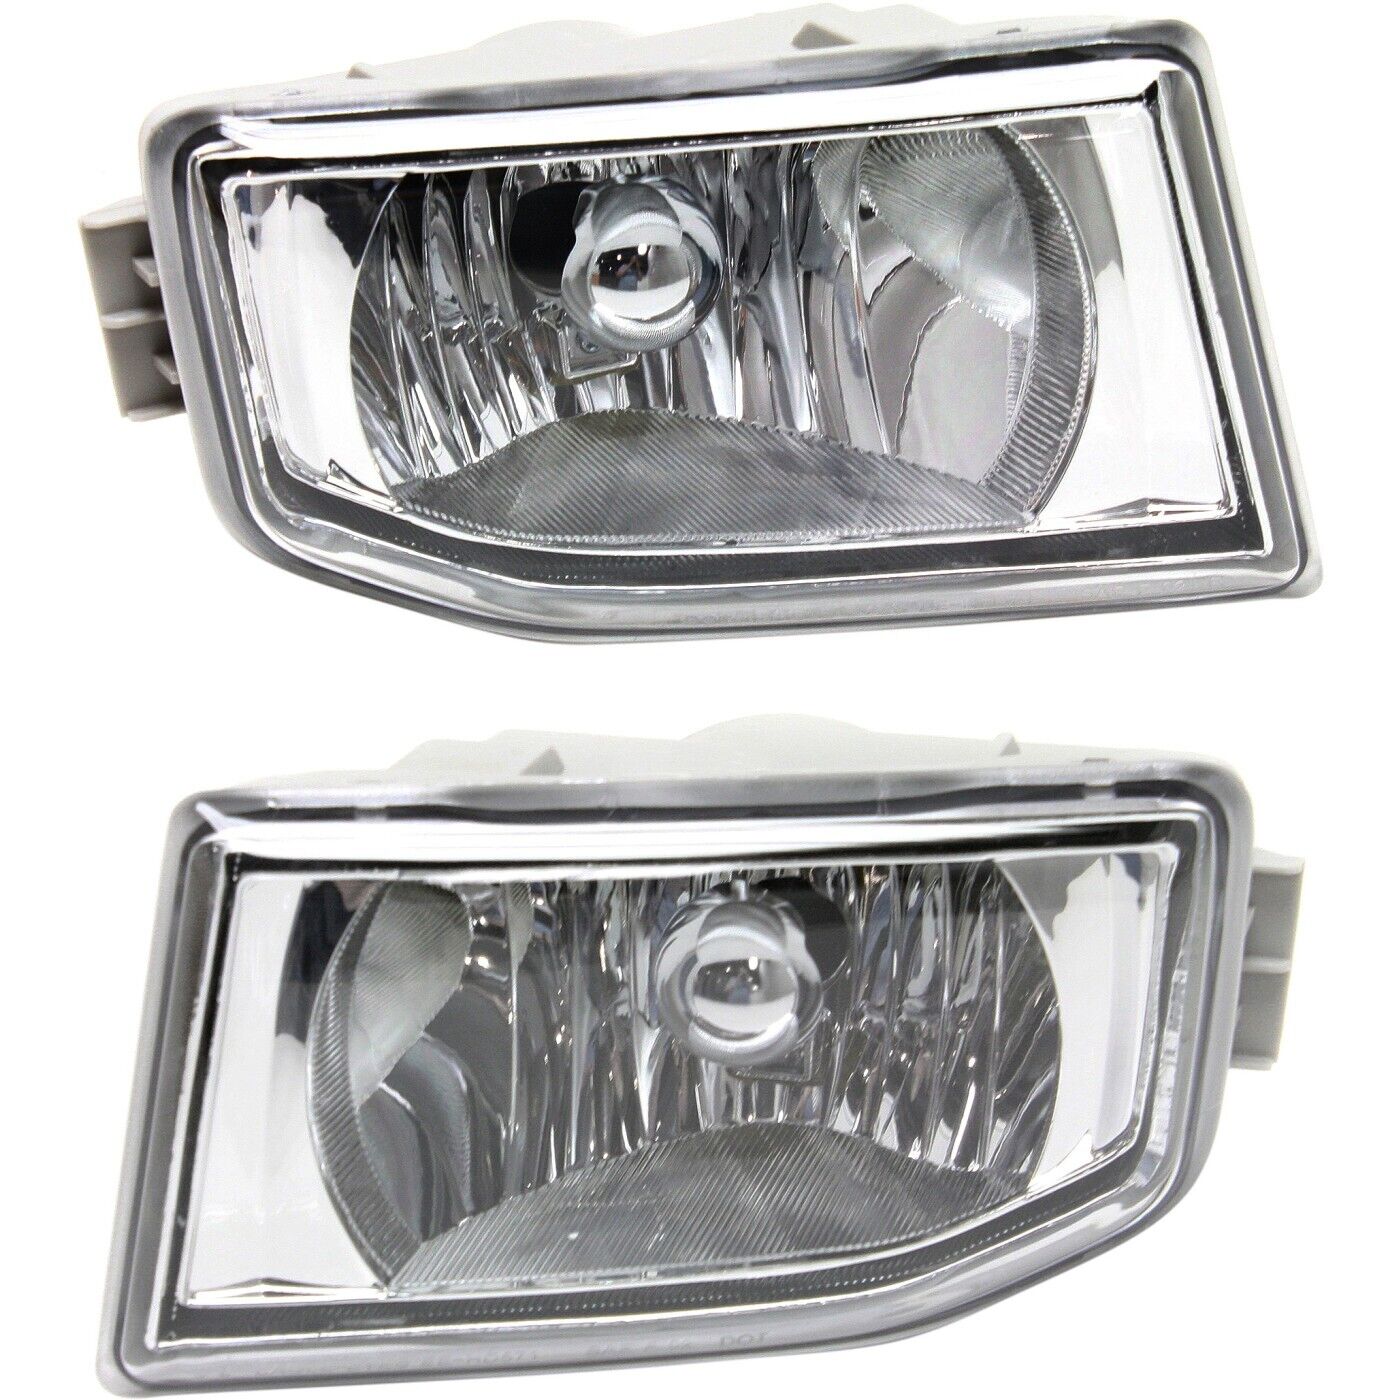 Front Fog Light Set For 2004-2006 Acura MDX Lens and Housing AC2593105 AC2592105